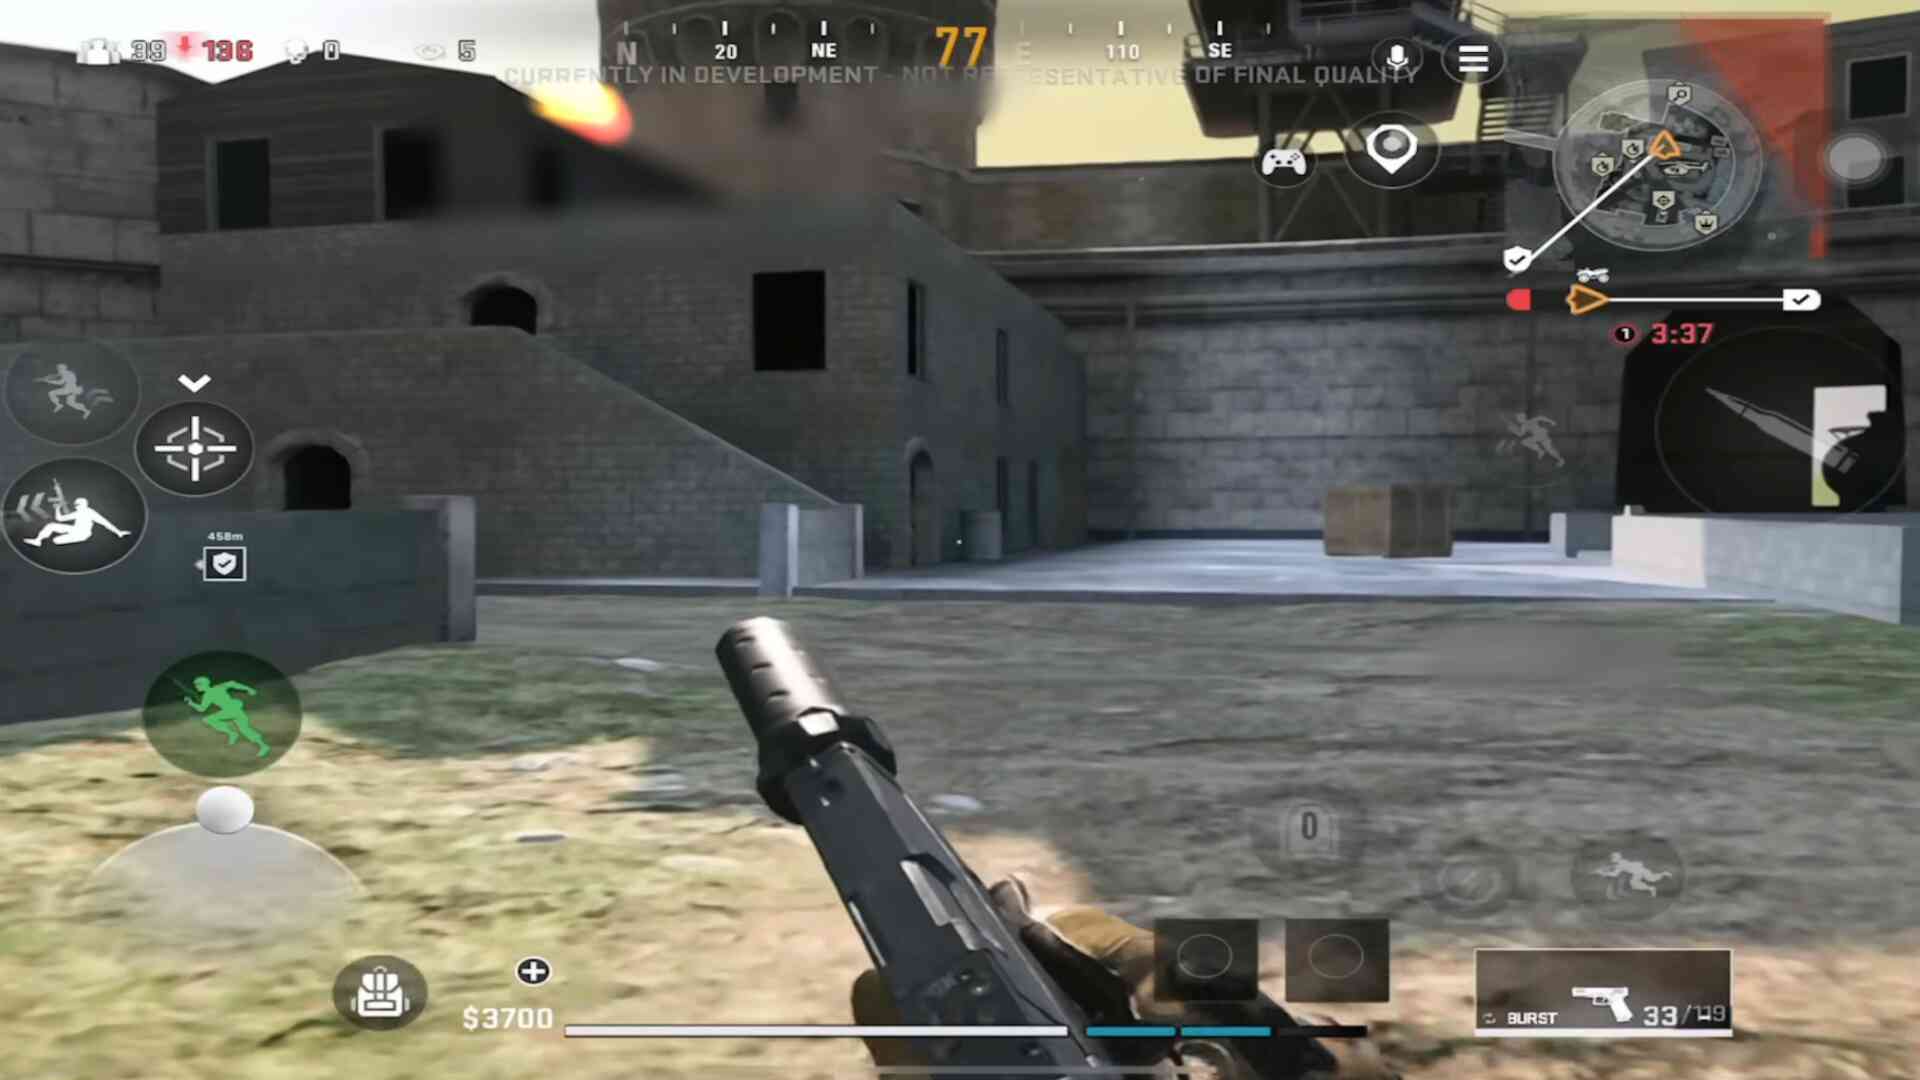 Call Of Duty Warzone Mobile APK For Android IOS